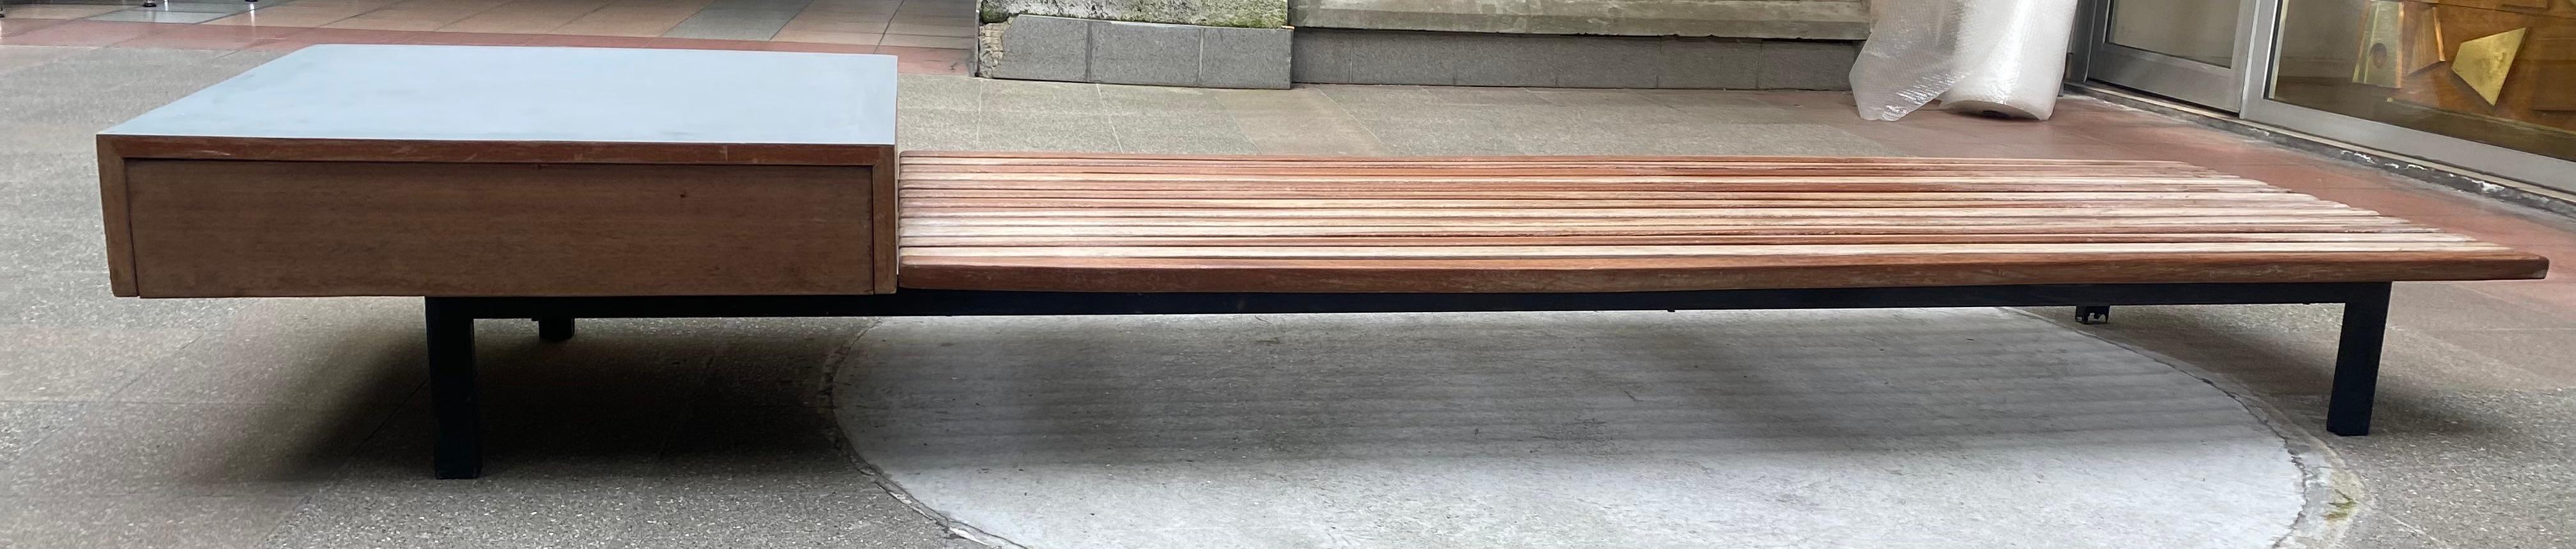 Formica Charlotte Perriand Bench 